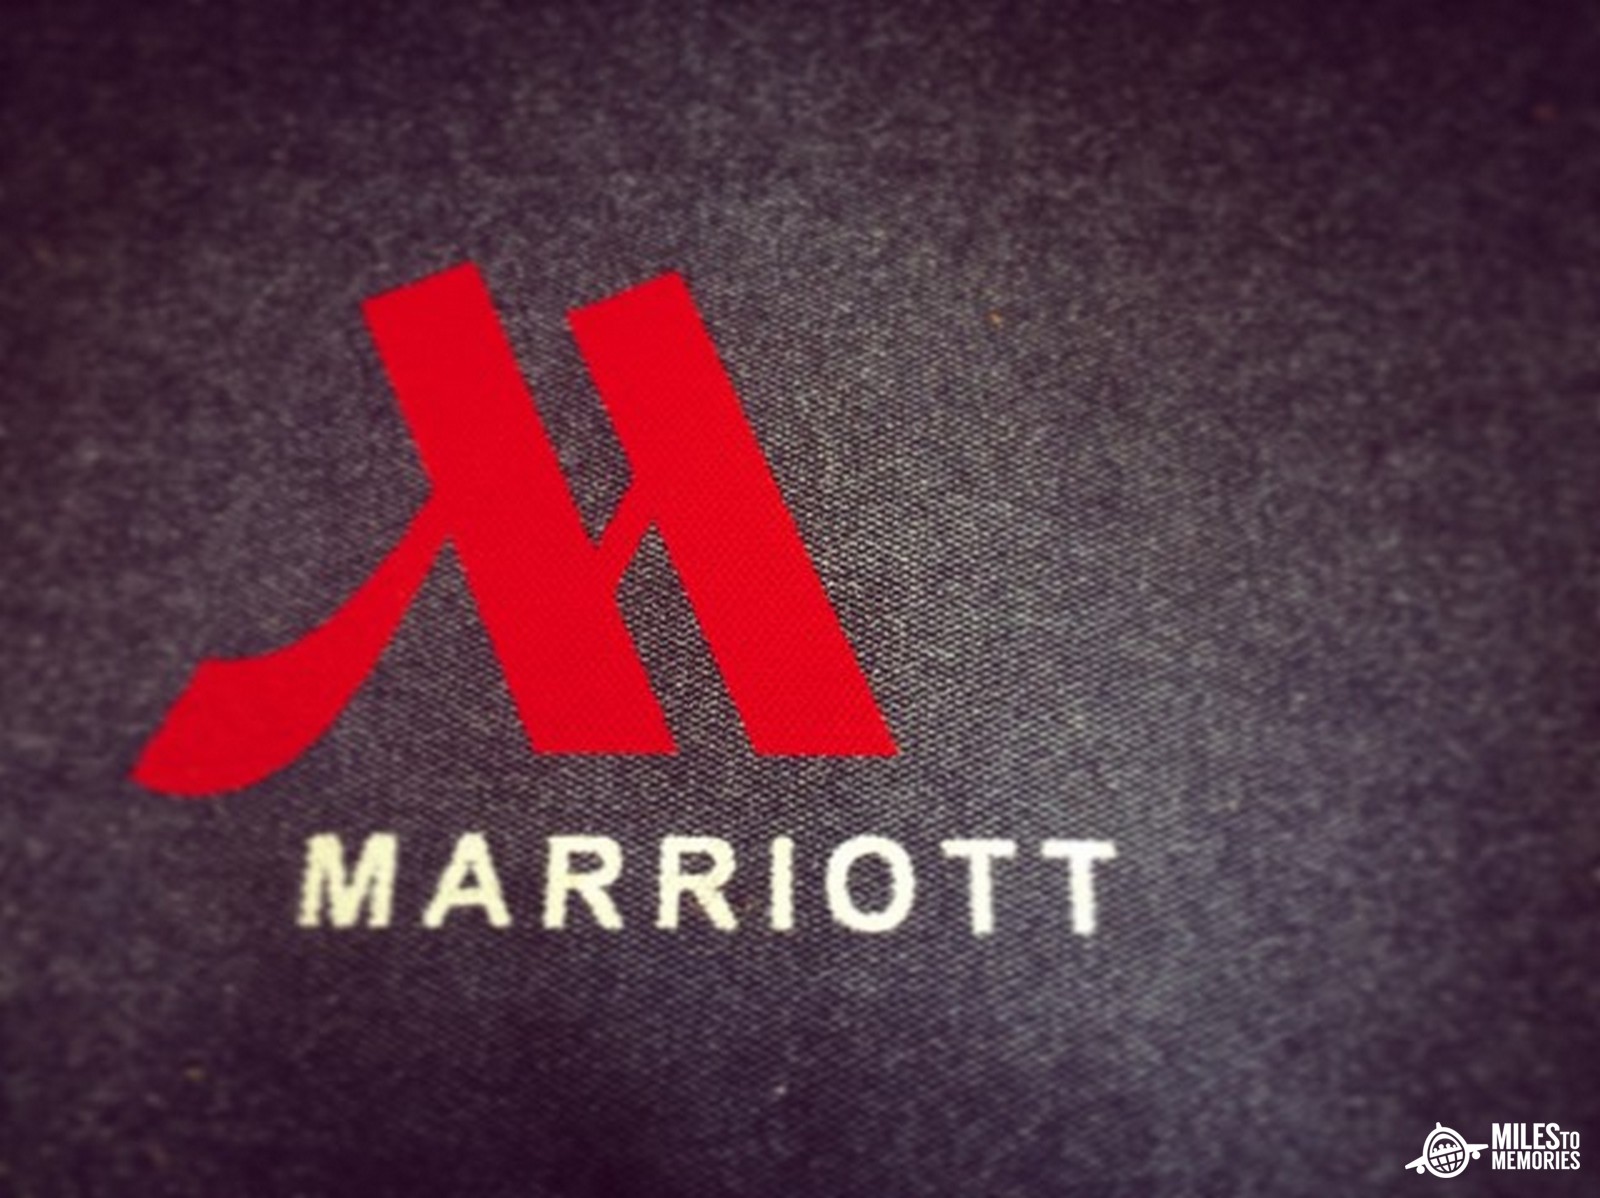 Marriott policies on extending status, free night awards, and other perks during COVID-19